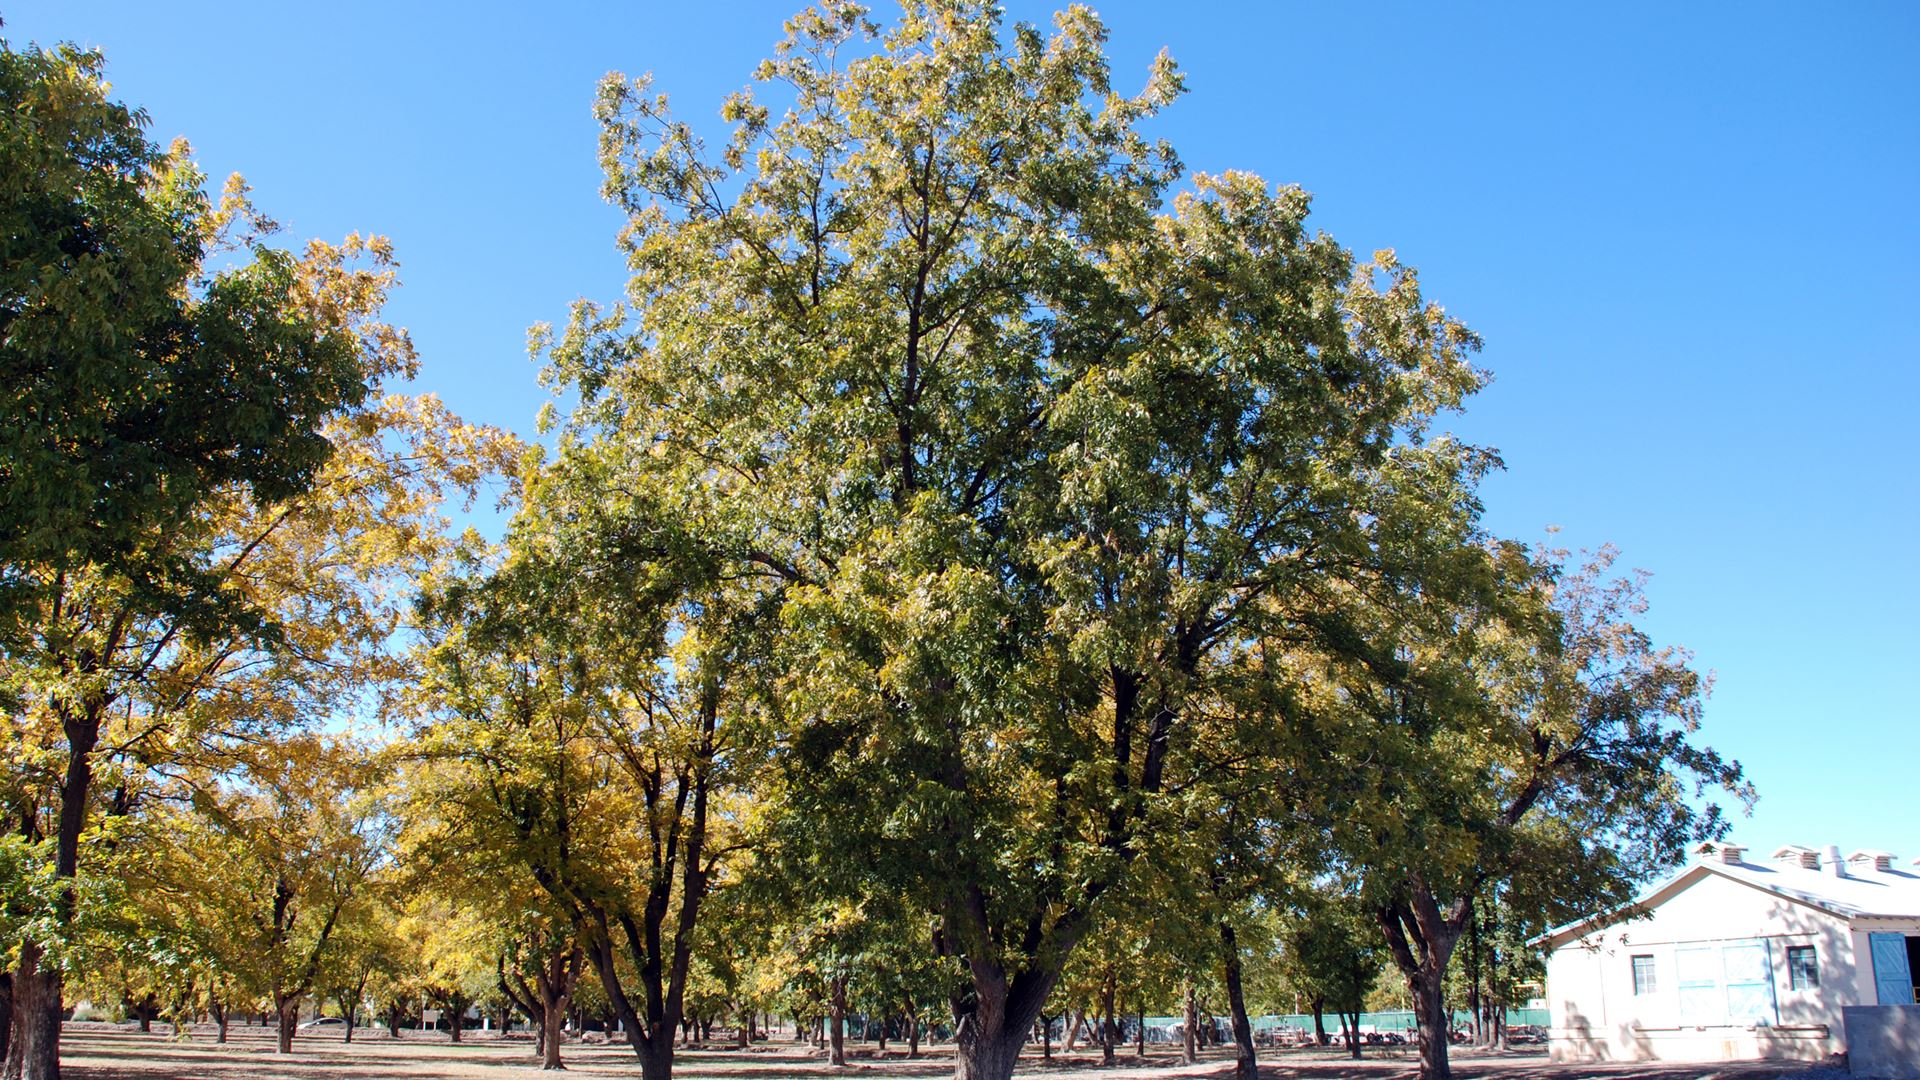 Western Pecan Growers Conference, co-sponsored by NMSU, set for March 1-3